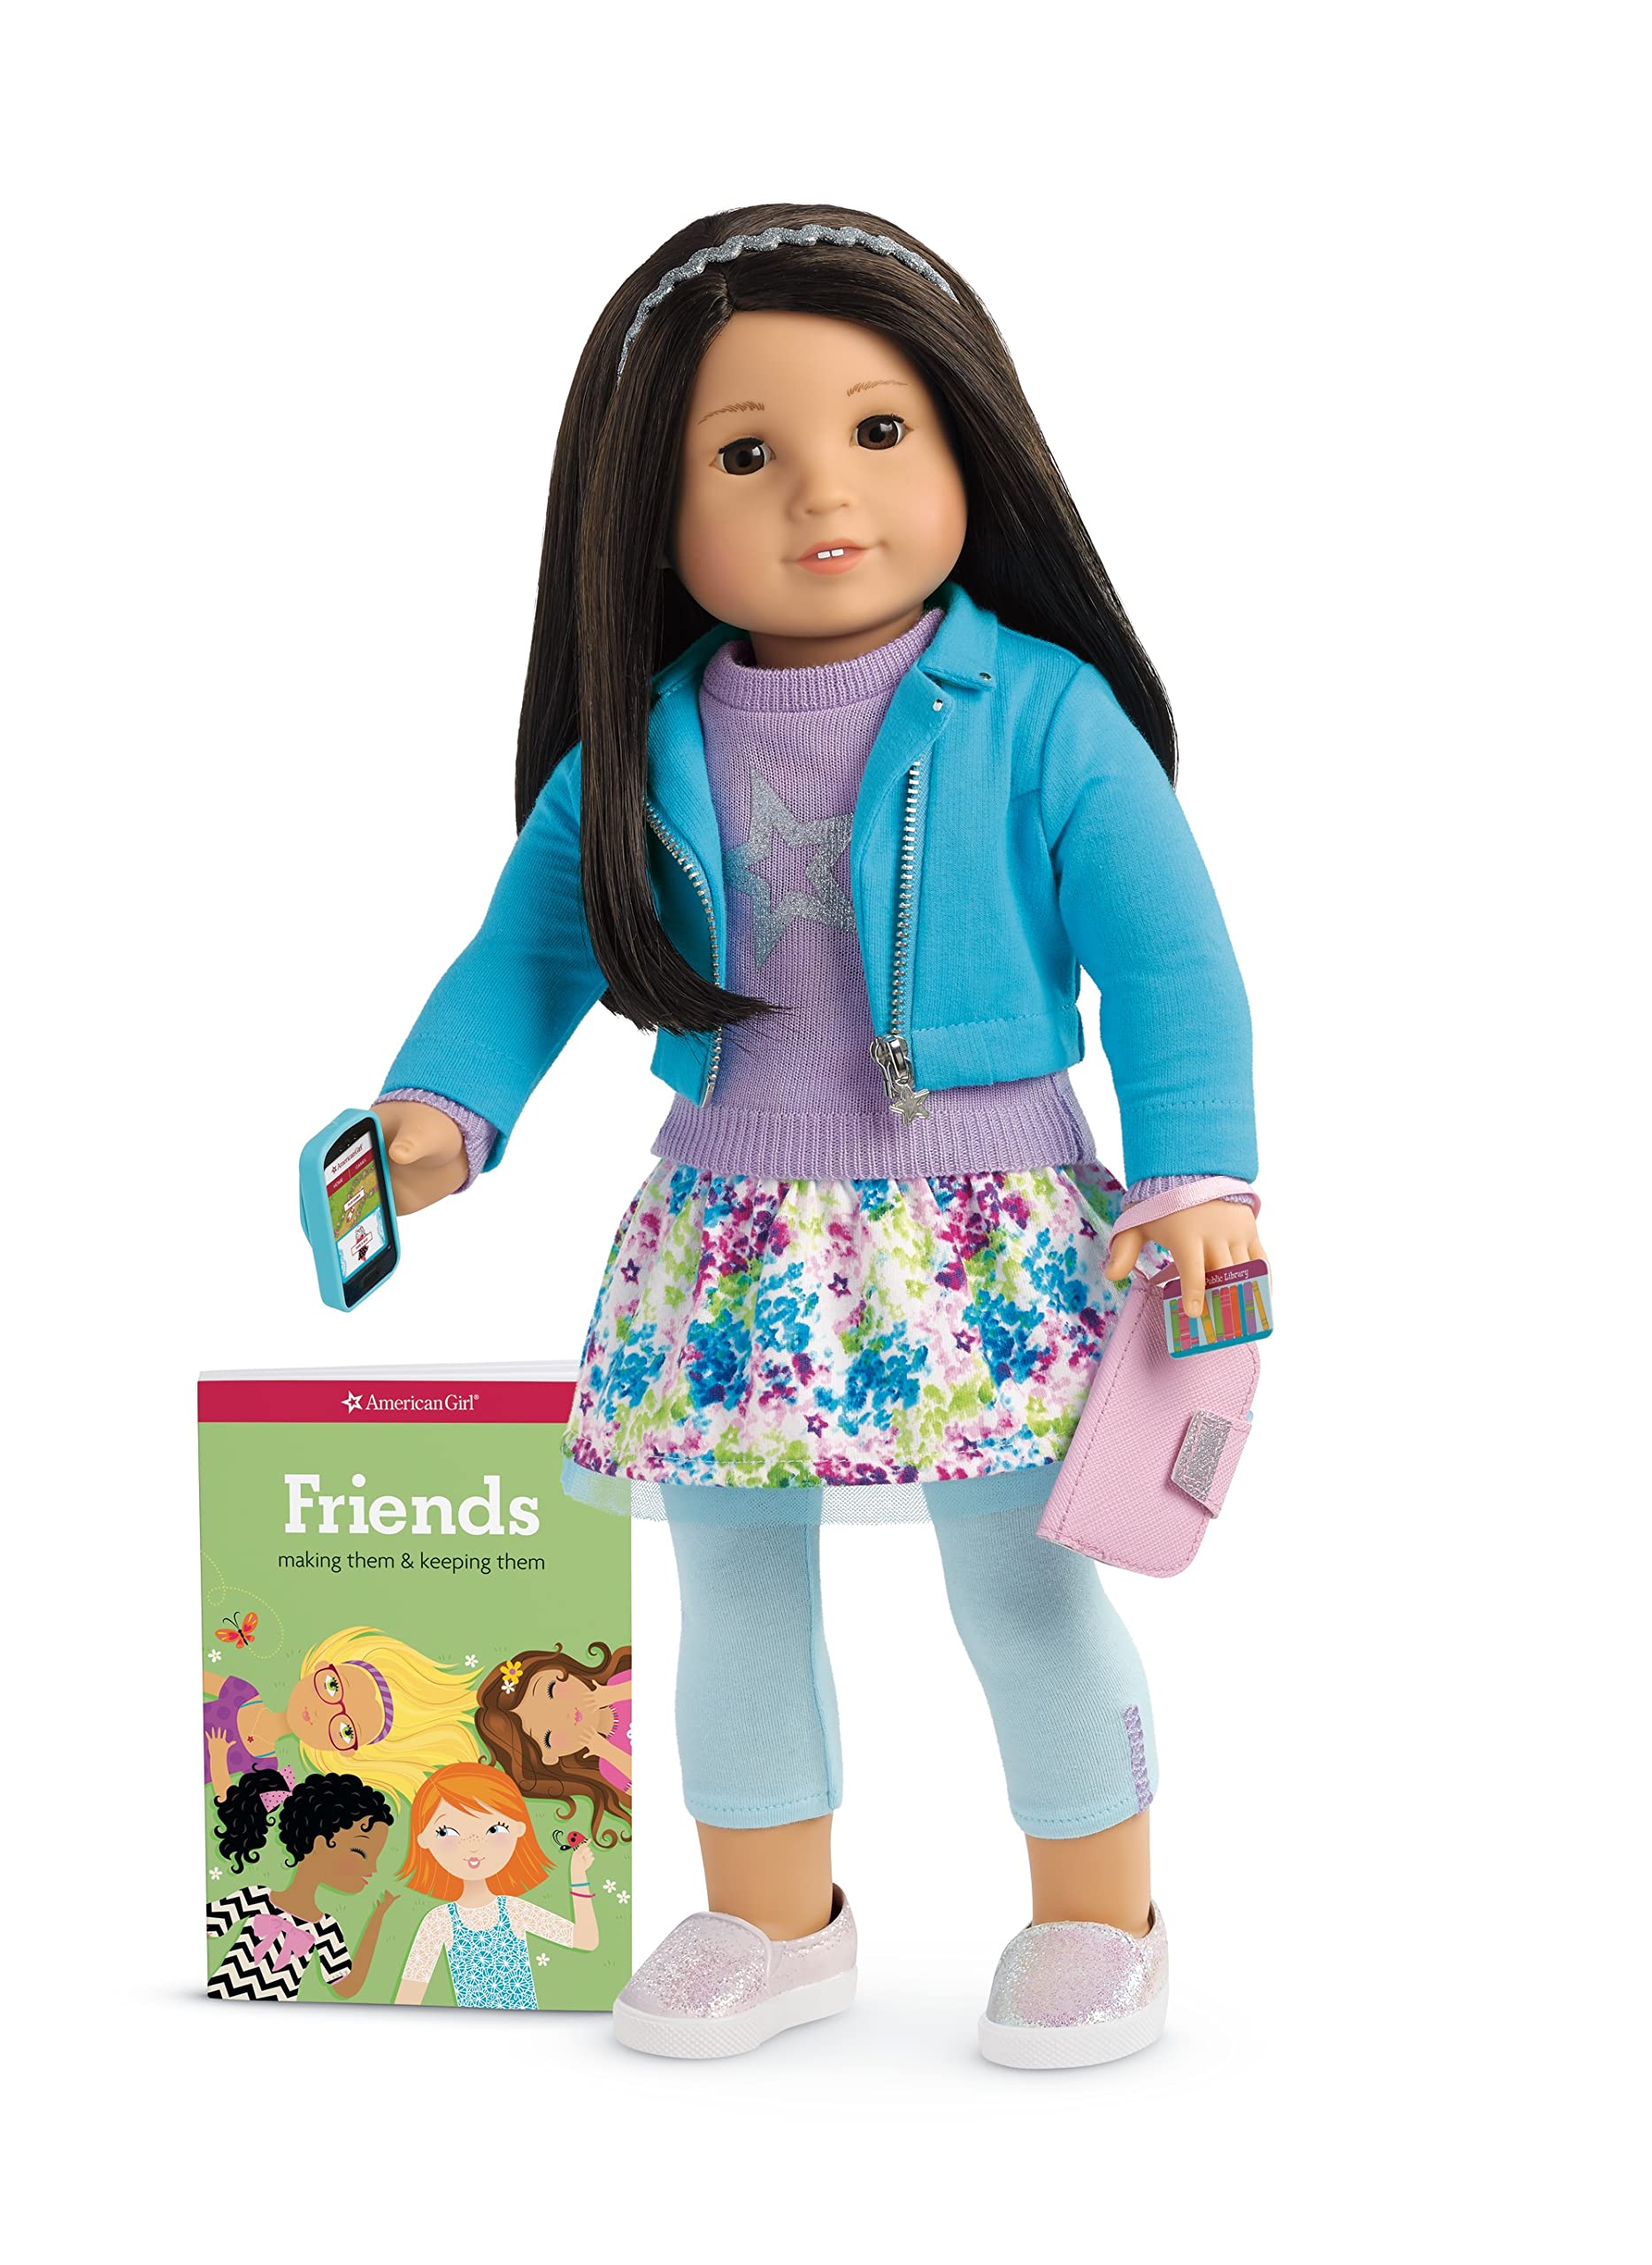 American Girl Truly Me Doll #64 with Brown Eyes, Black Hair, Light Skin Tone